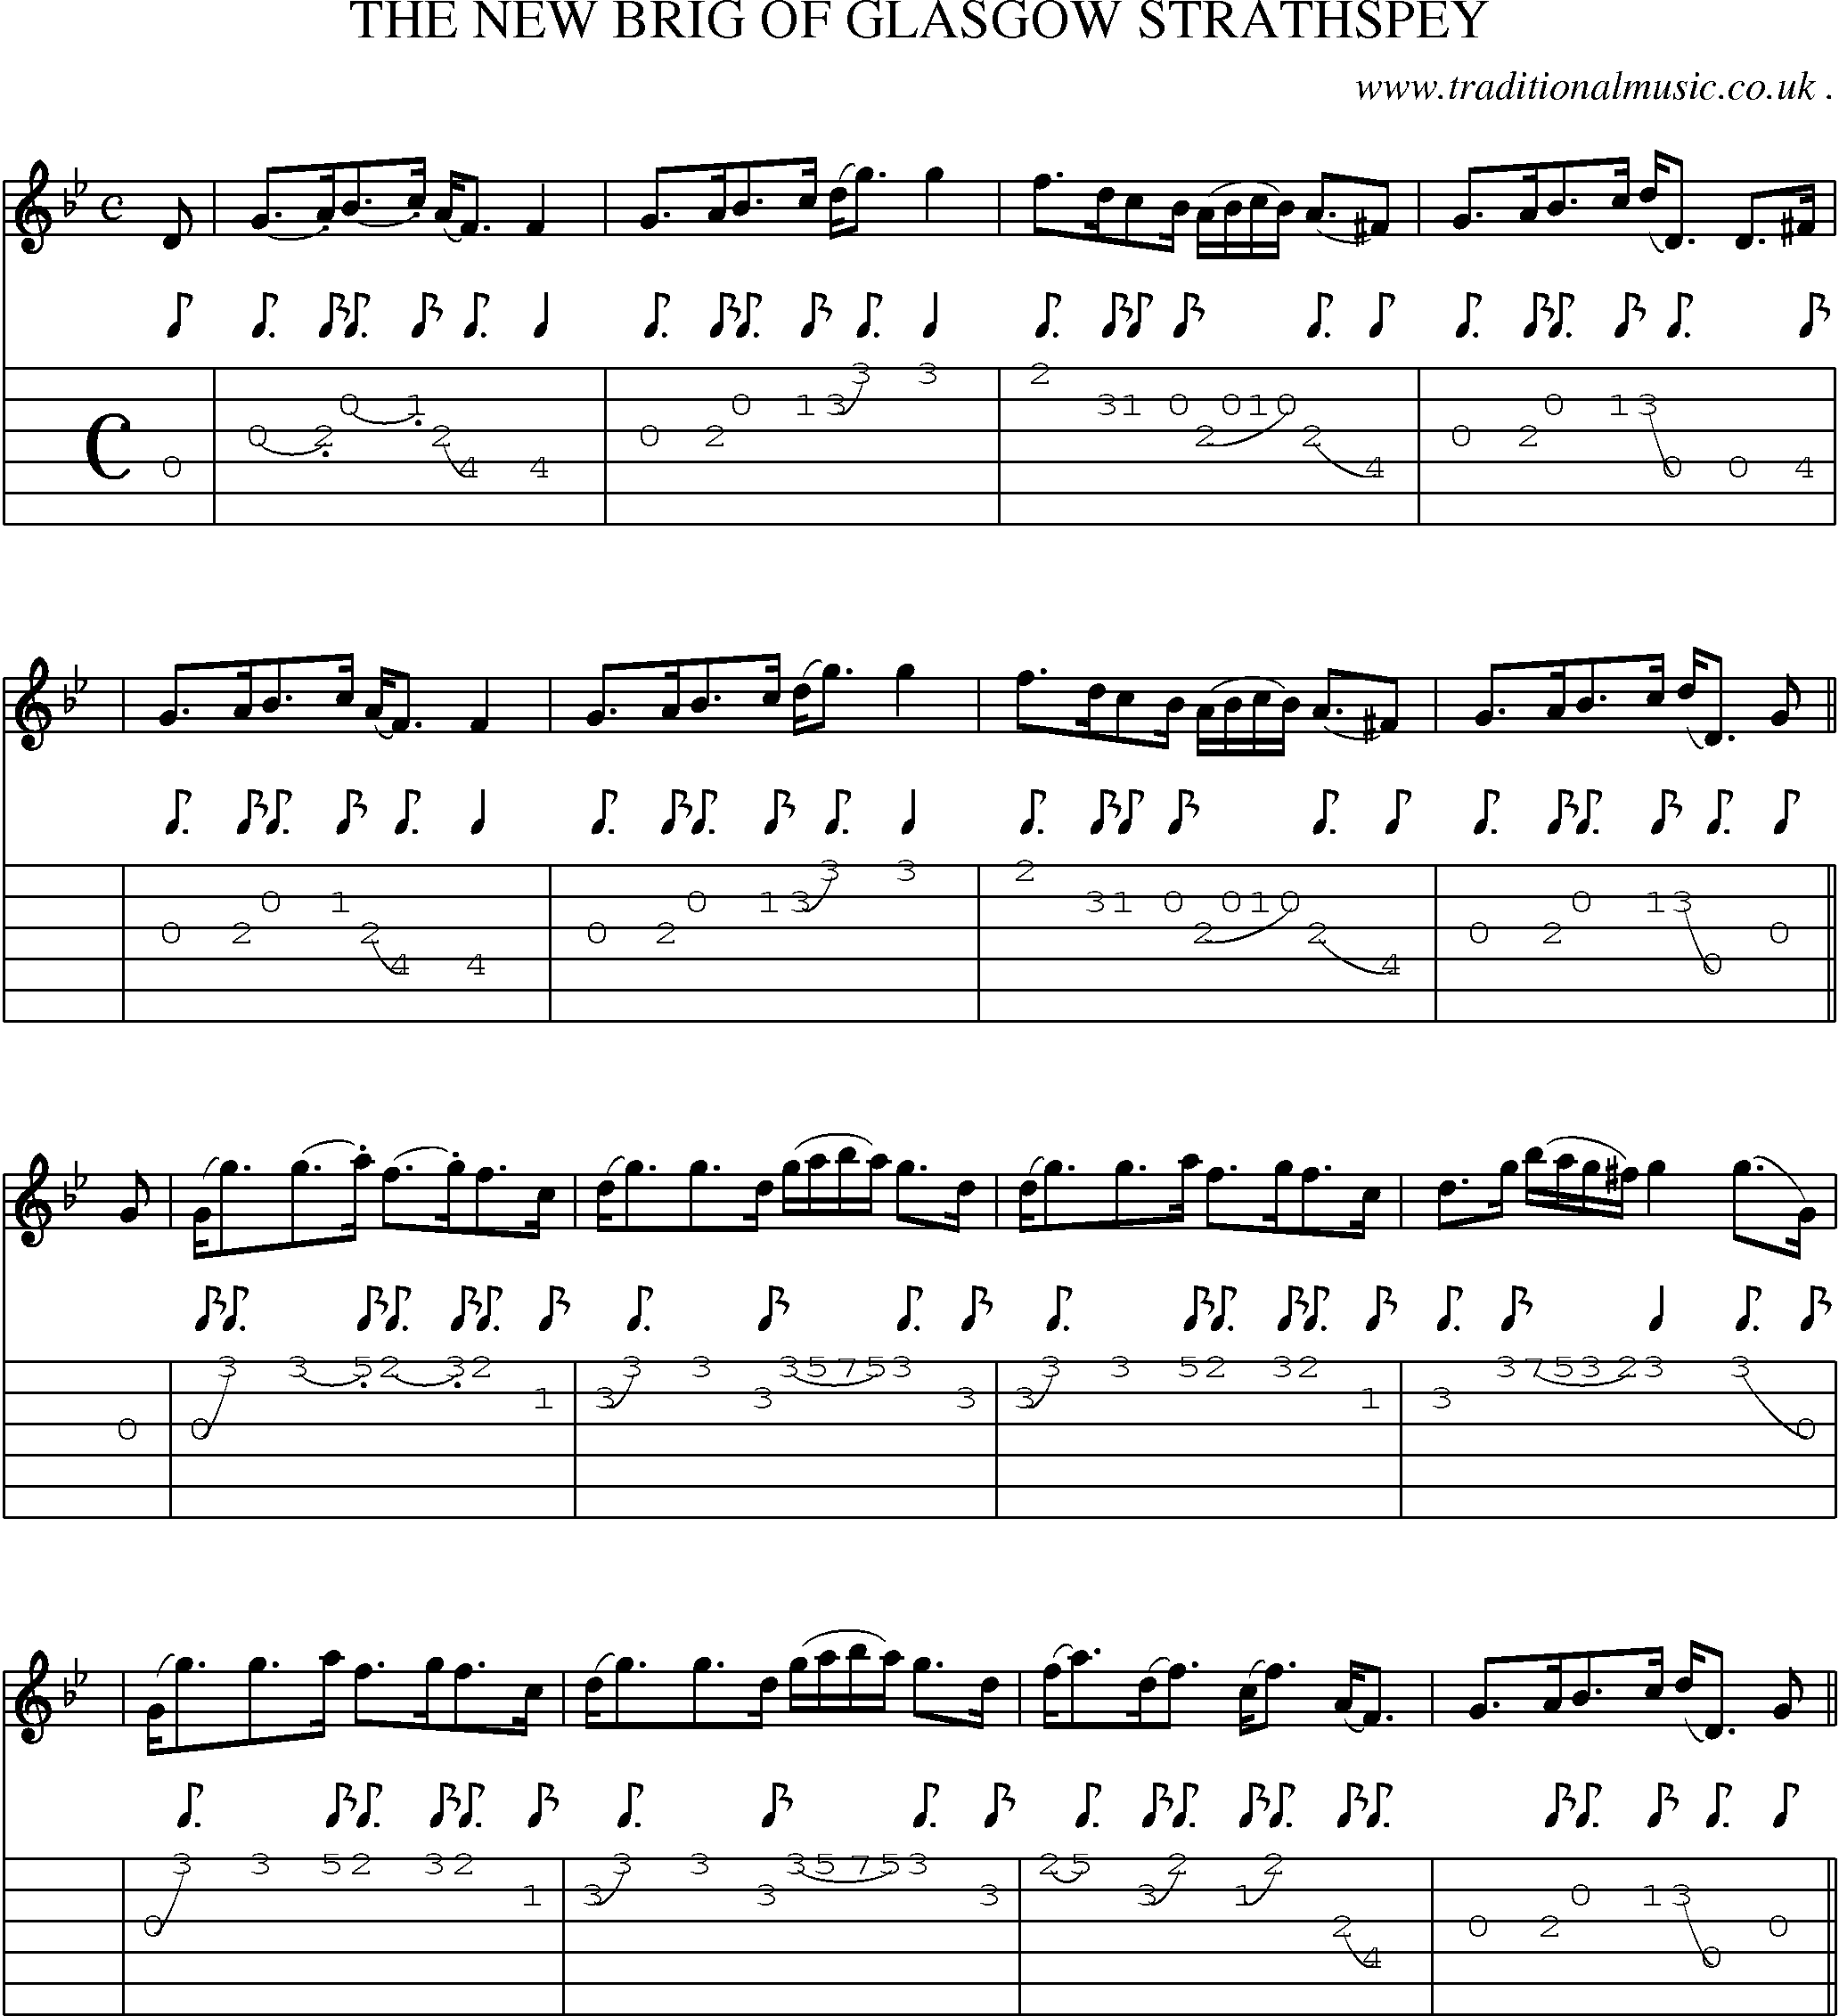 Sheet-Music and Guitar Tabs for The New Brig Of Glasgow Strathspey